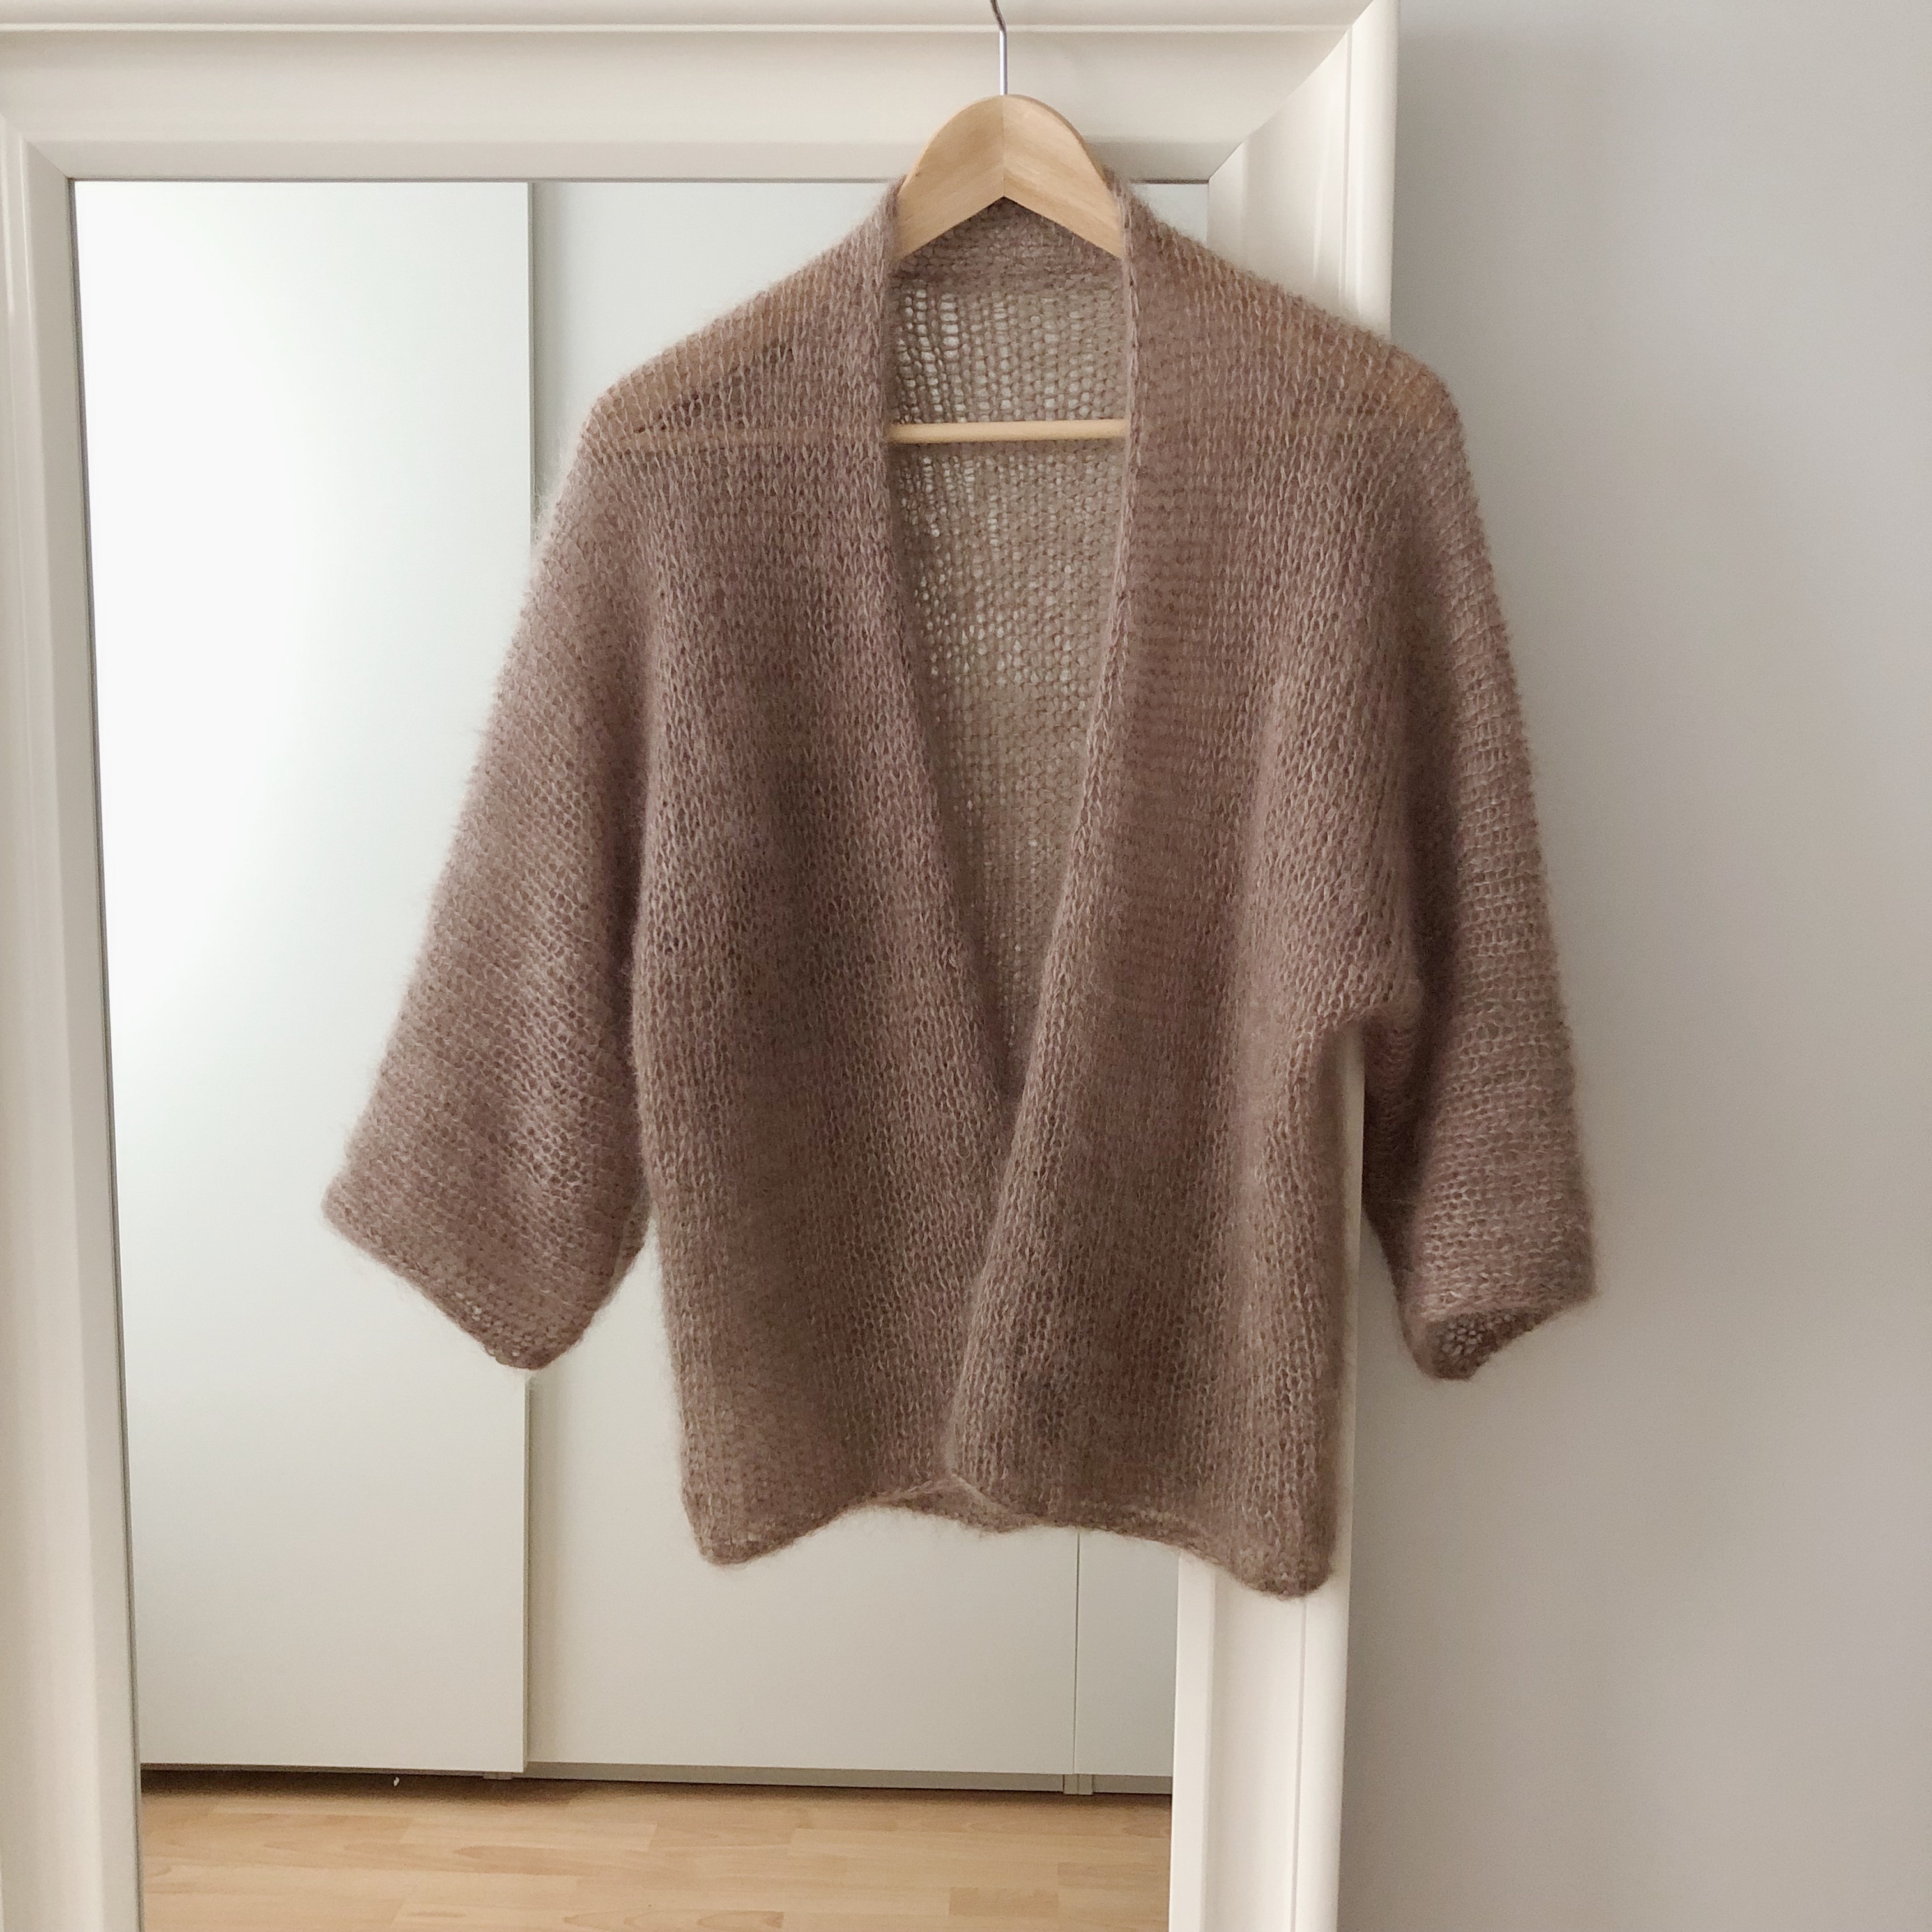 Knitting pattern for an oversize cardigan with wide batwing sleeves.